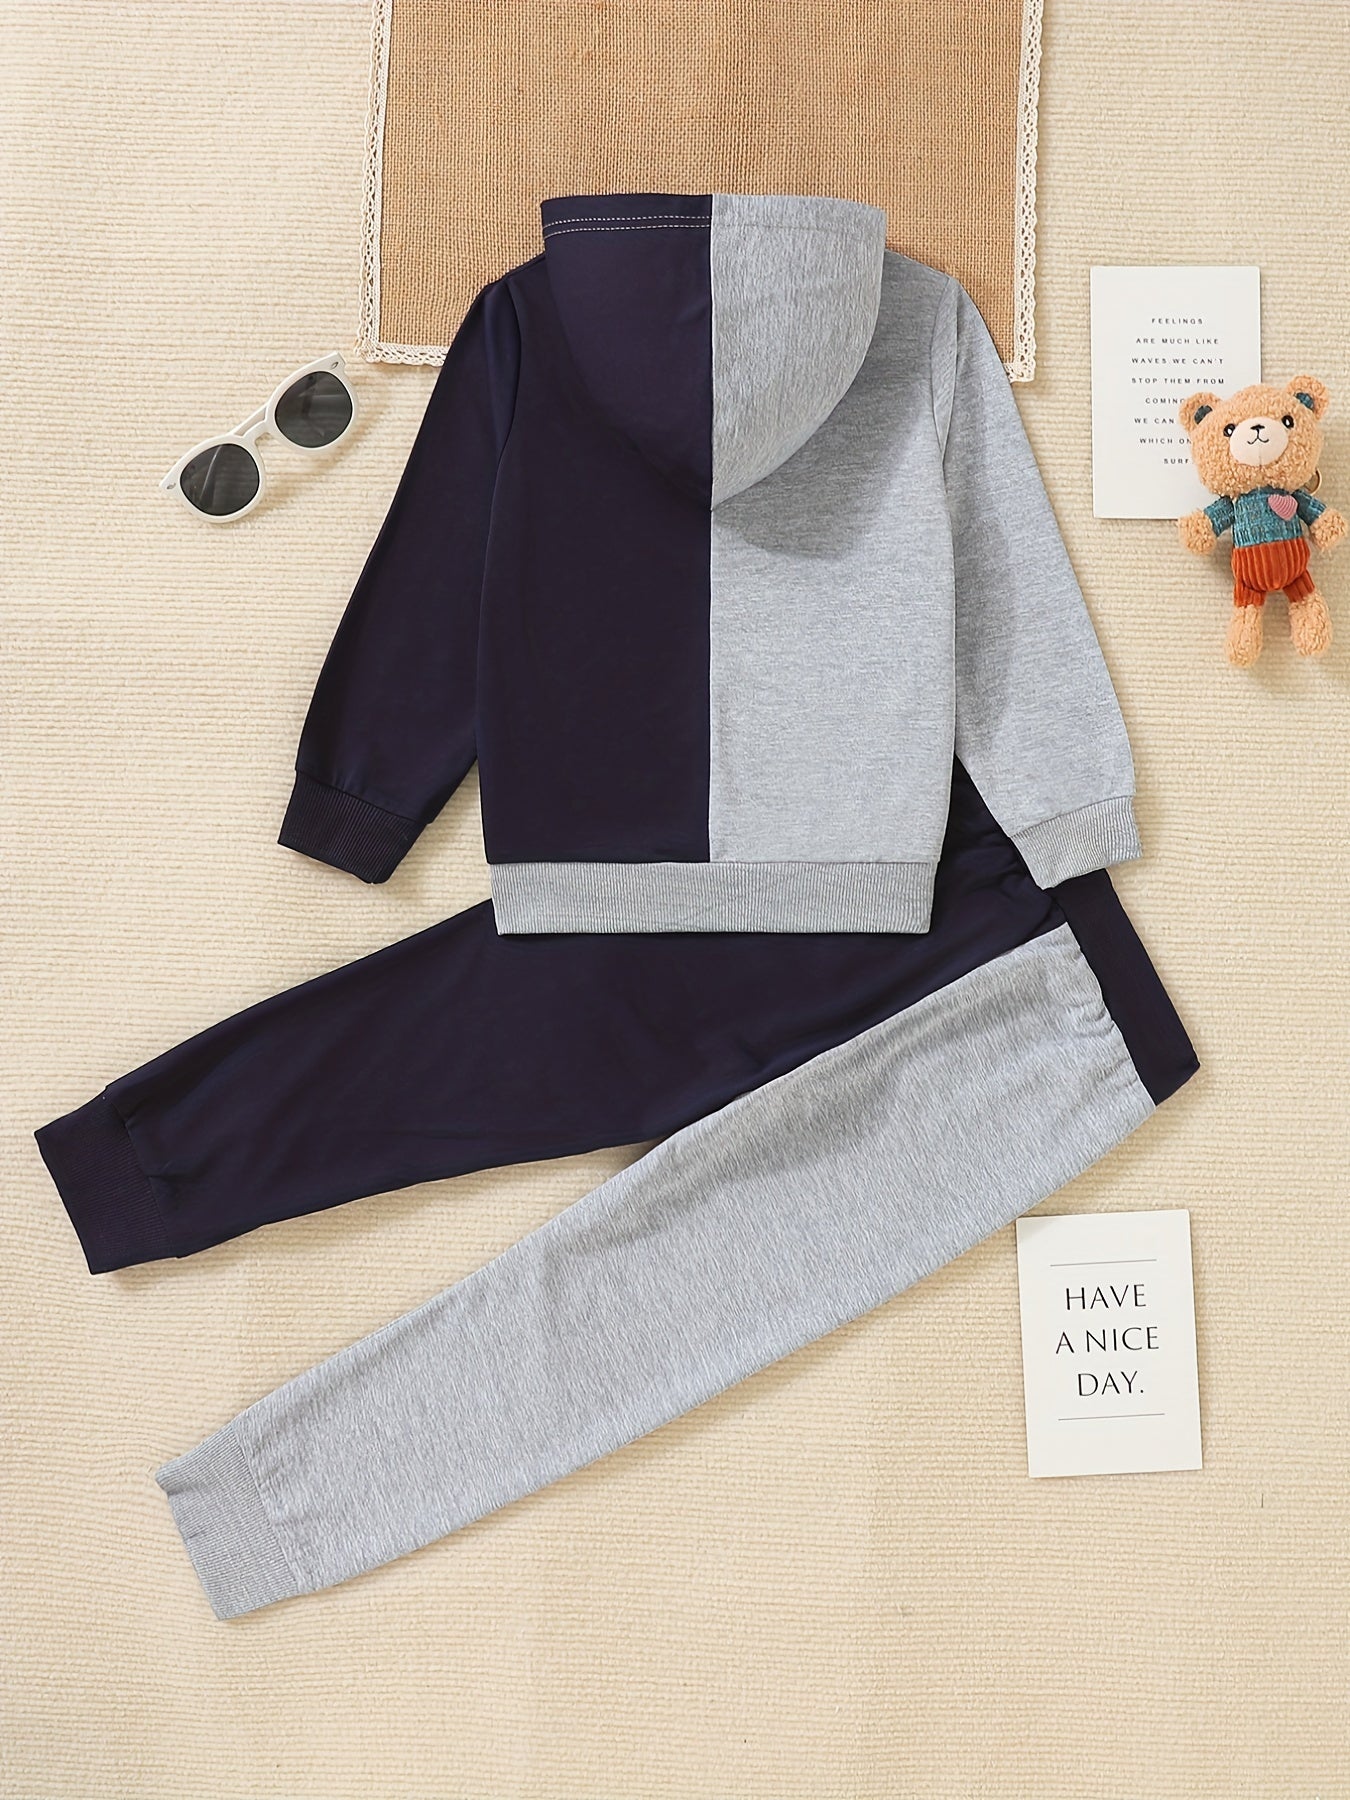 Boy's Color Clash 2pcs, Hoodie & Sweatpants Set, Funny Face Print Long Sleeve Top, Casual Outfits, Kids Clothes For Spring Fall